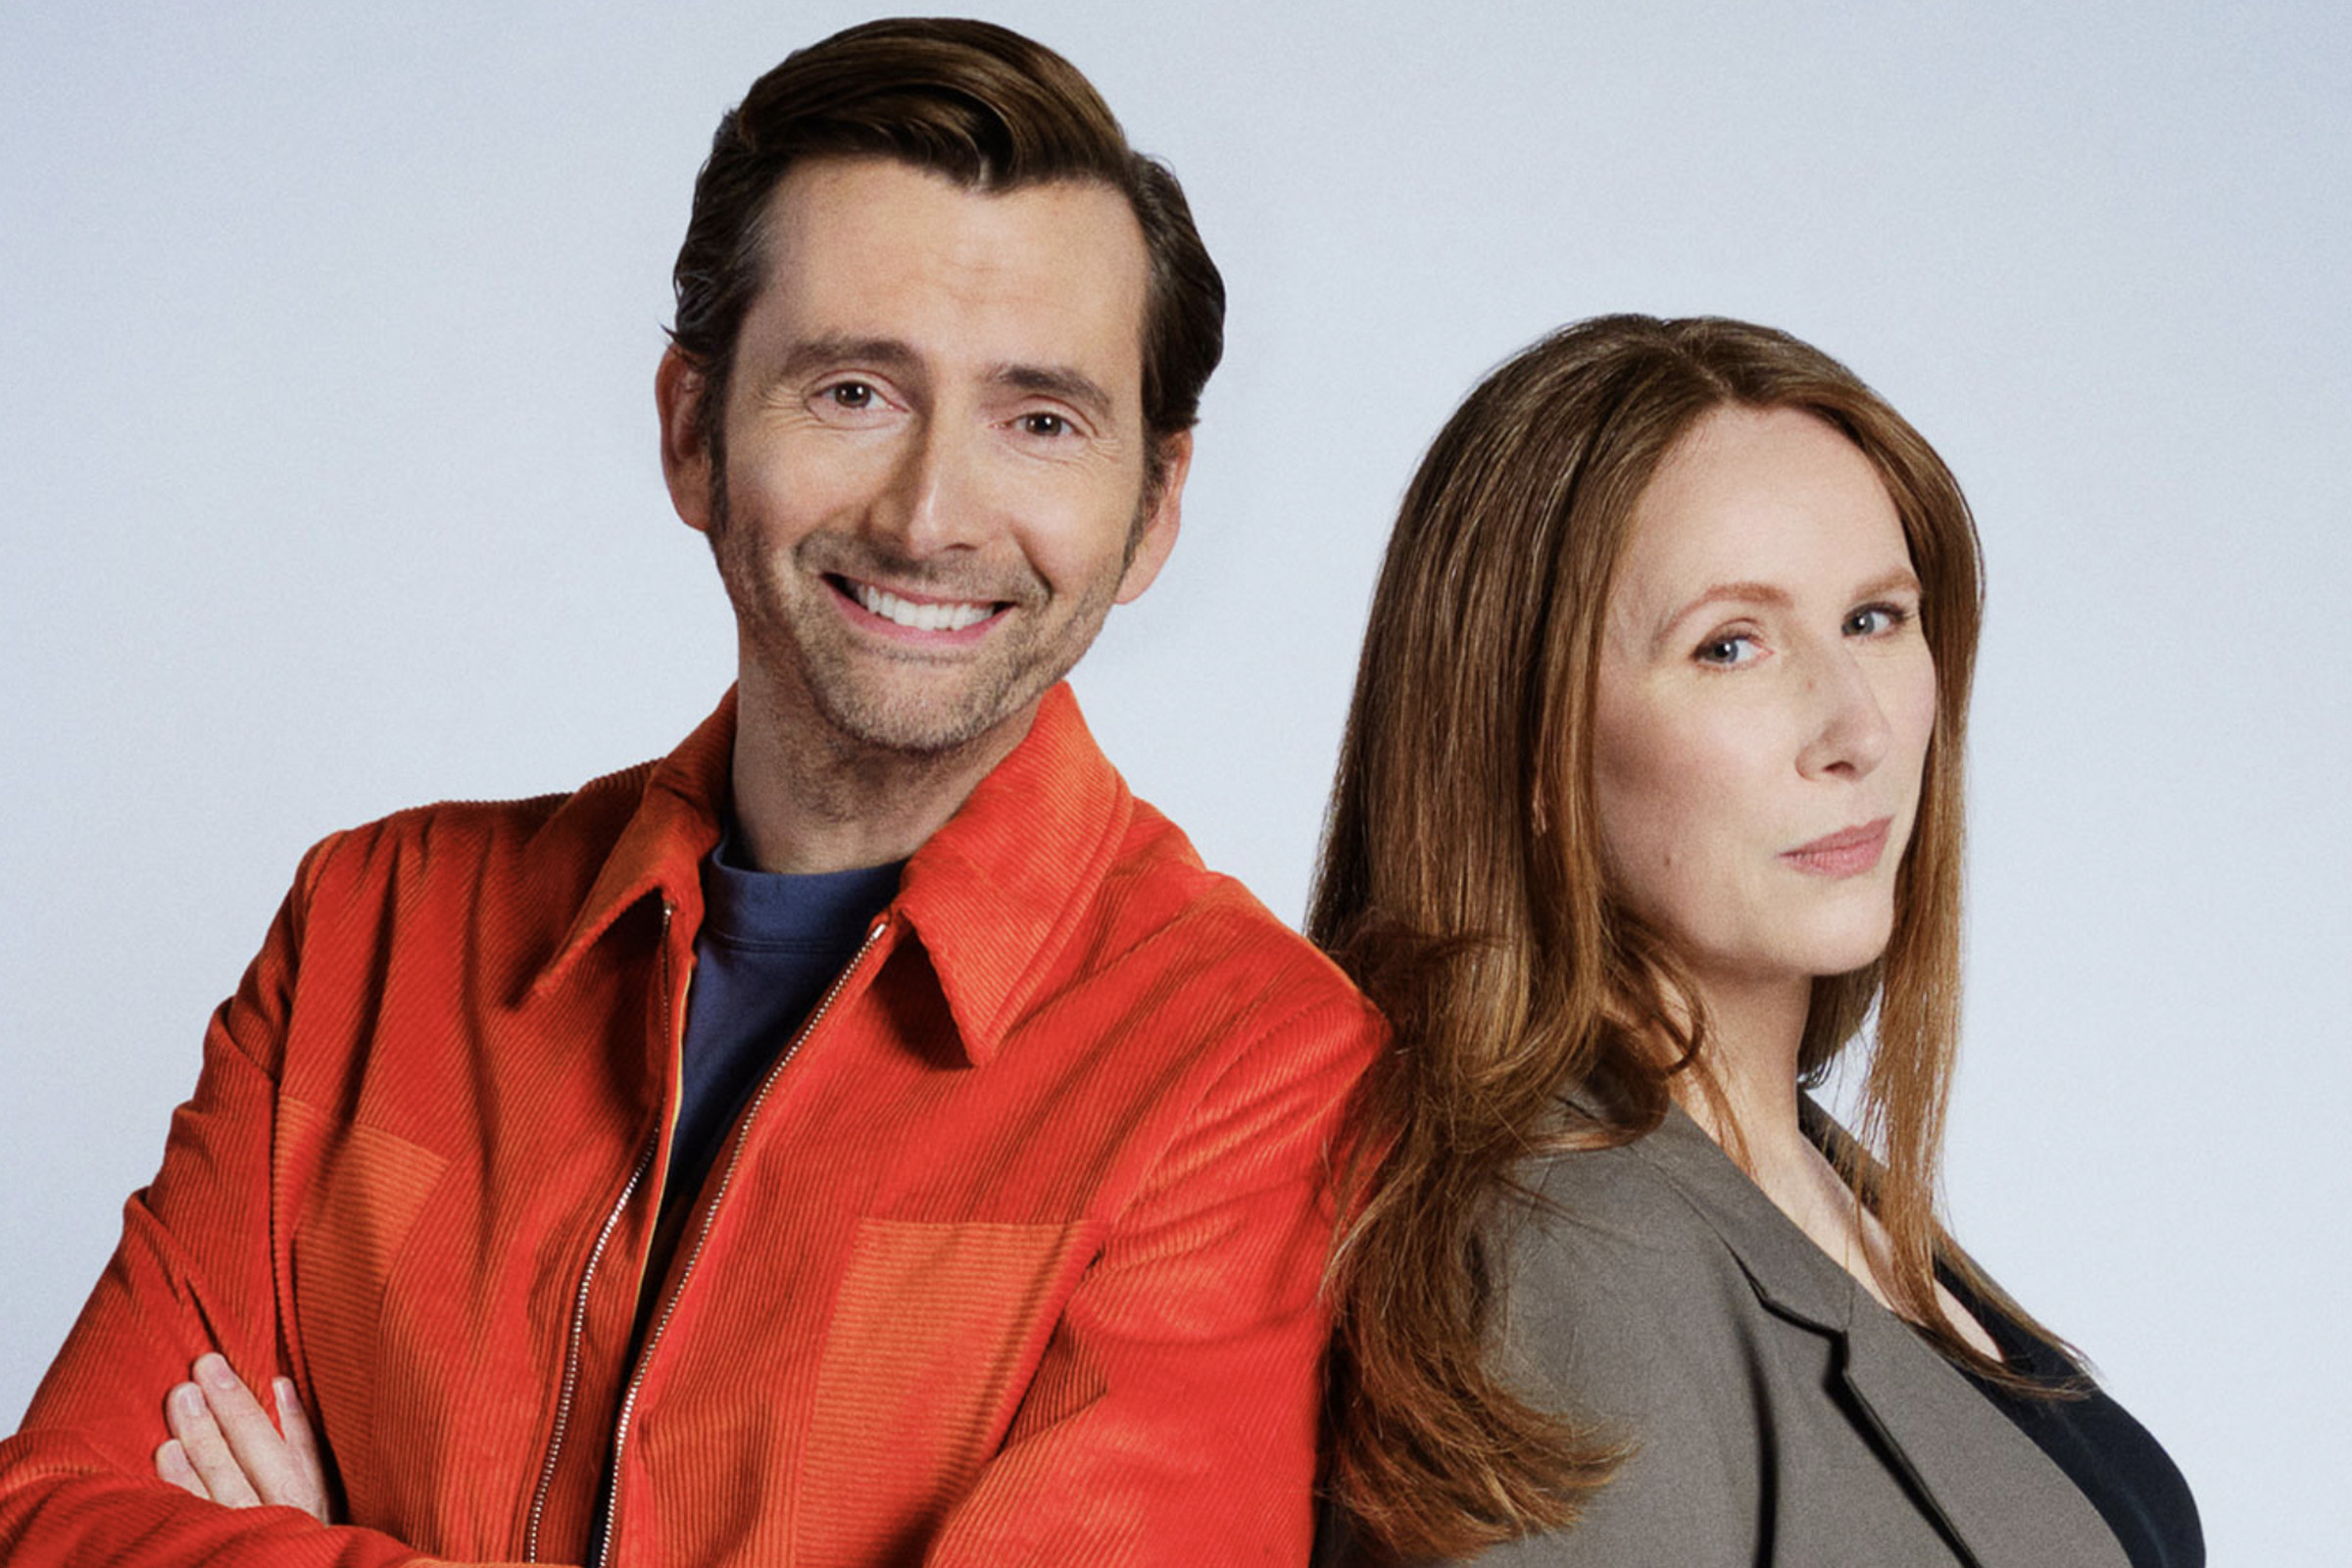 Tennant and Tate will star in an upcoming 2023 special.